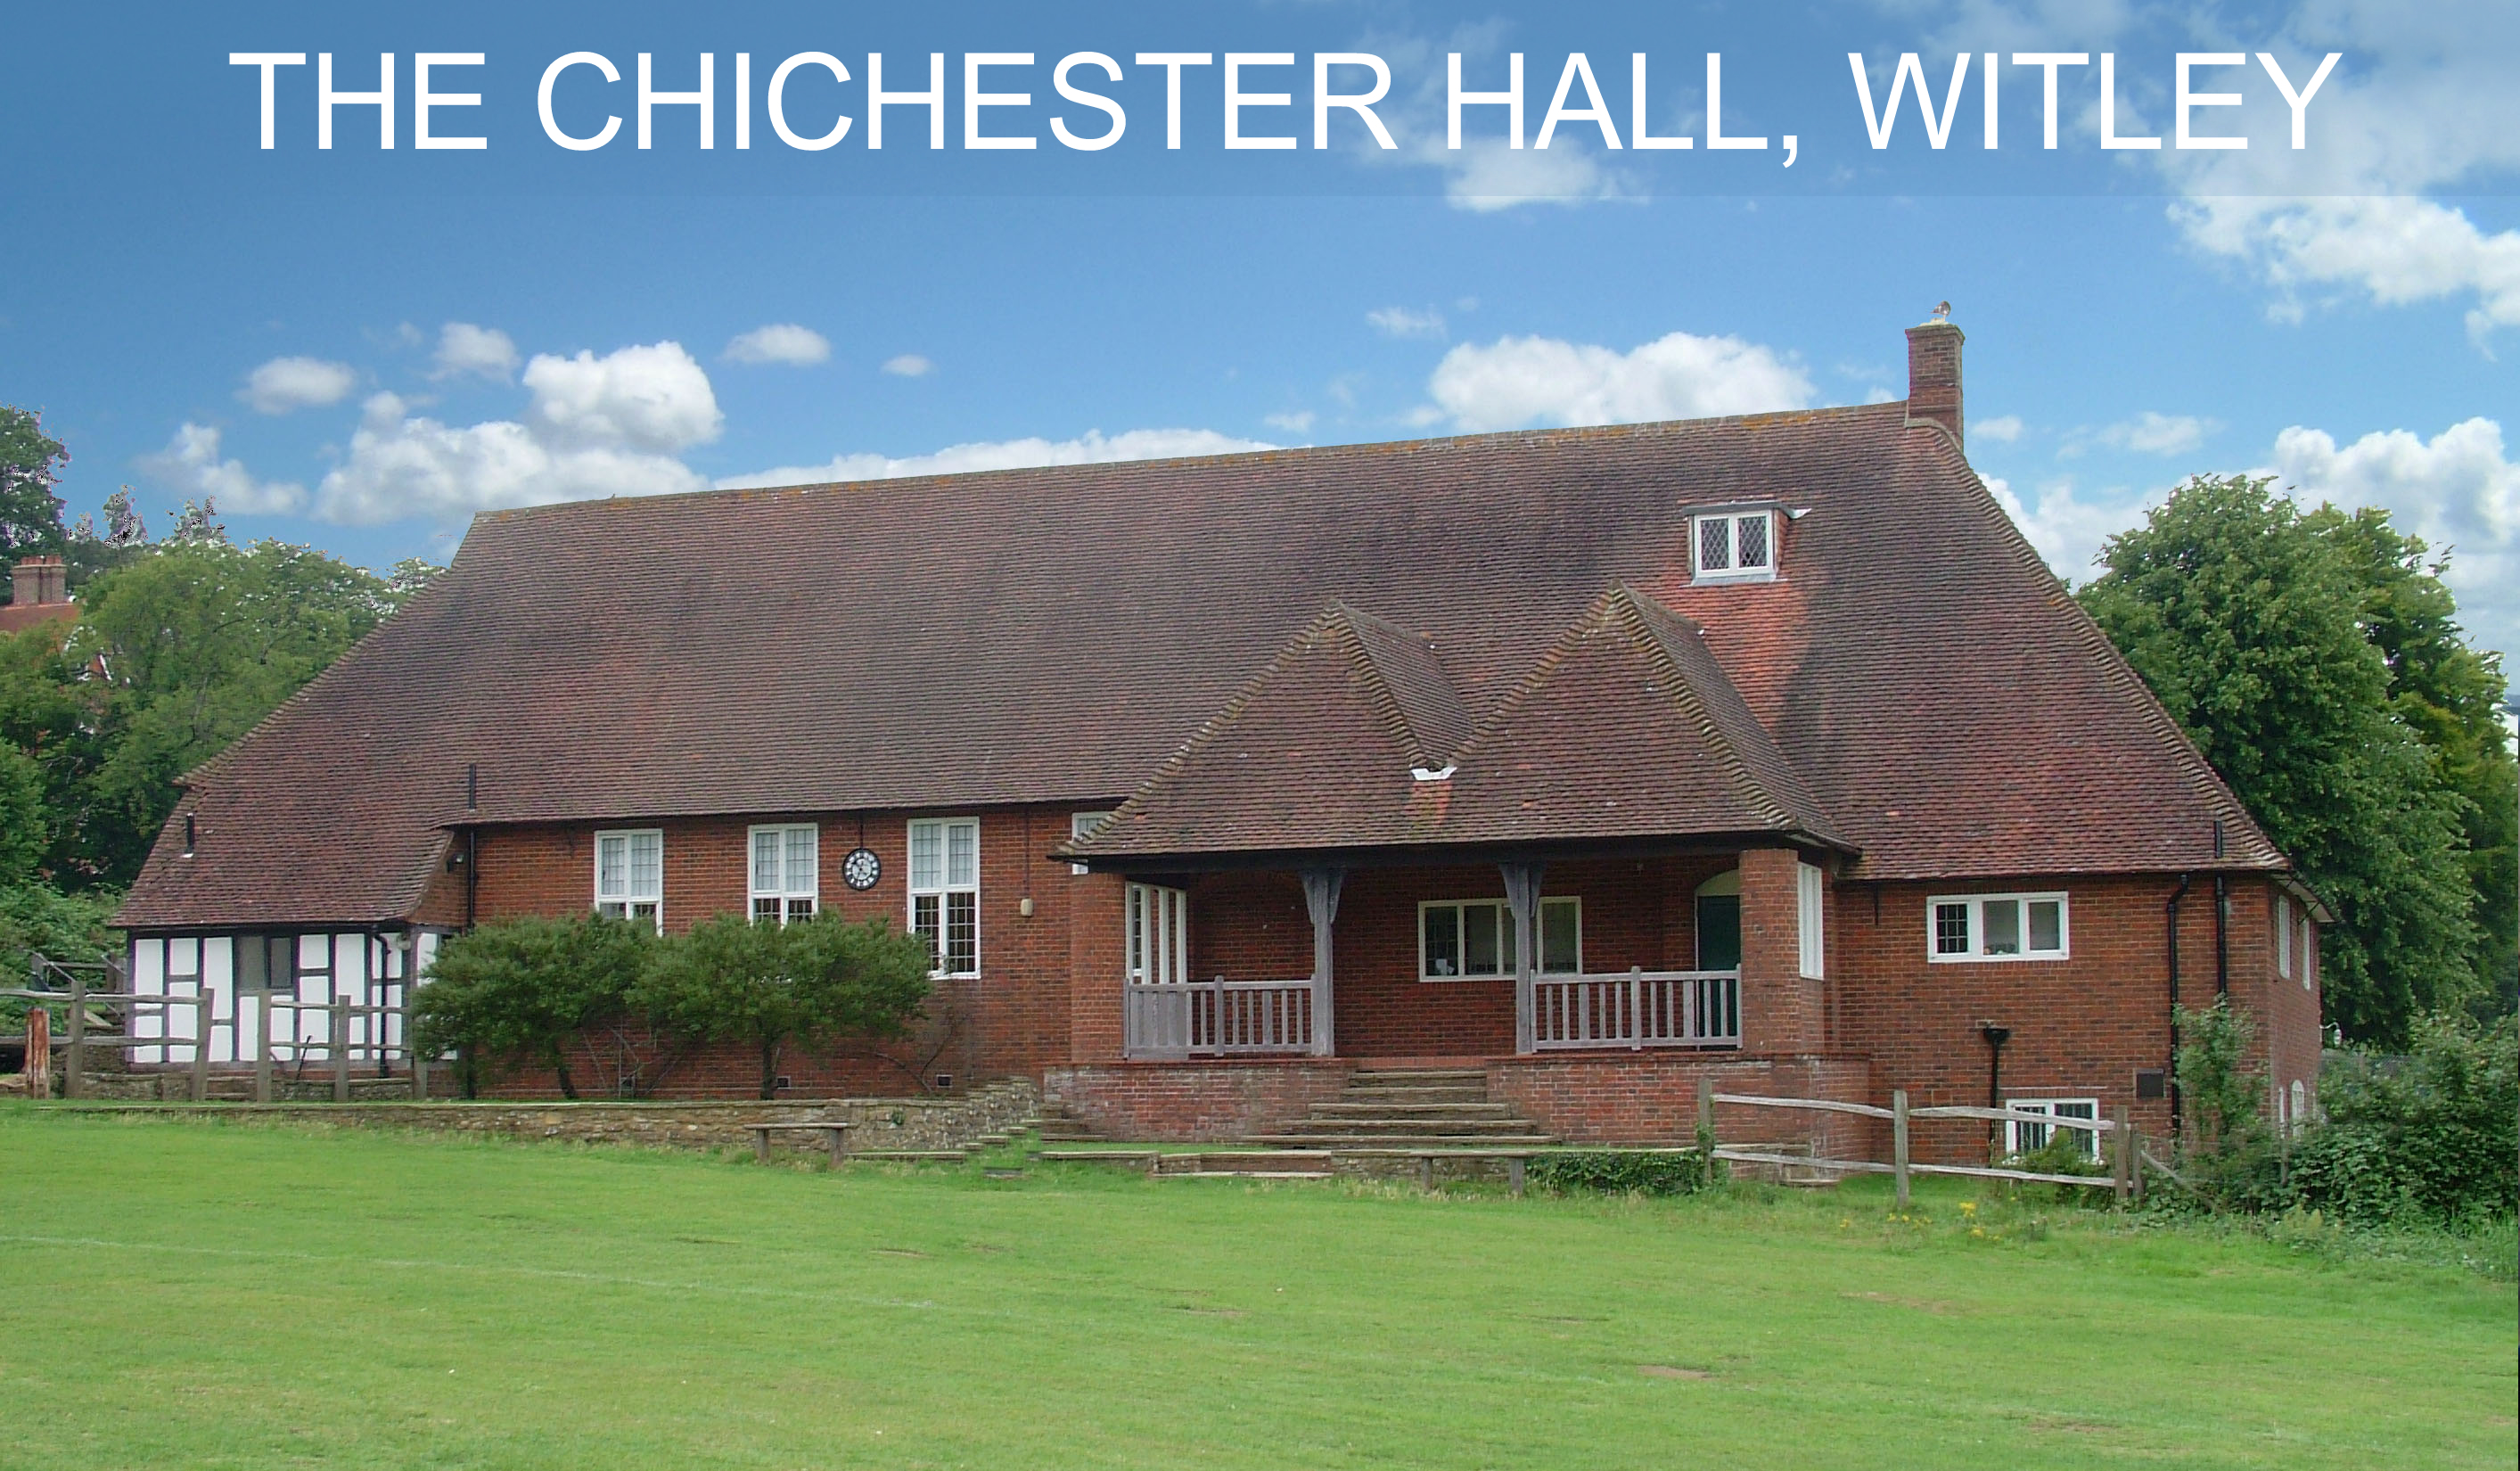 Picture of the Chichester Hall